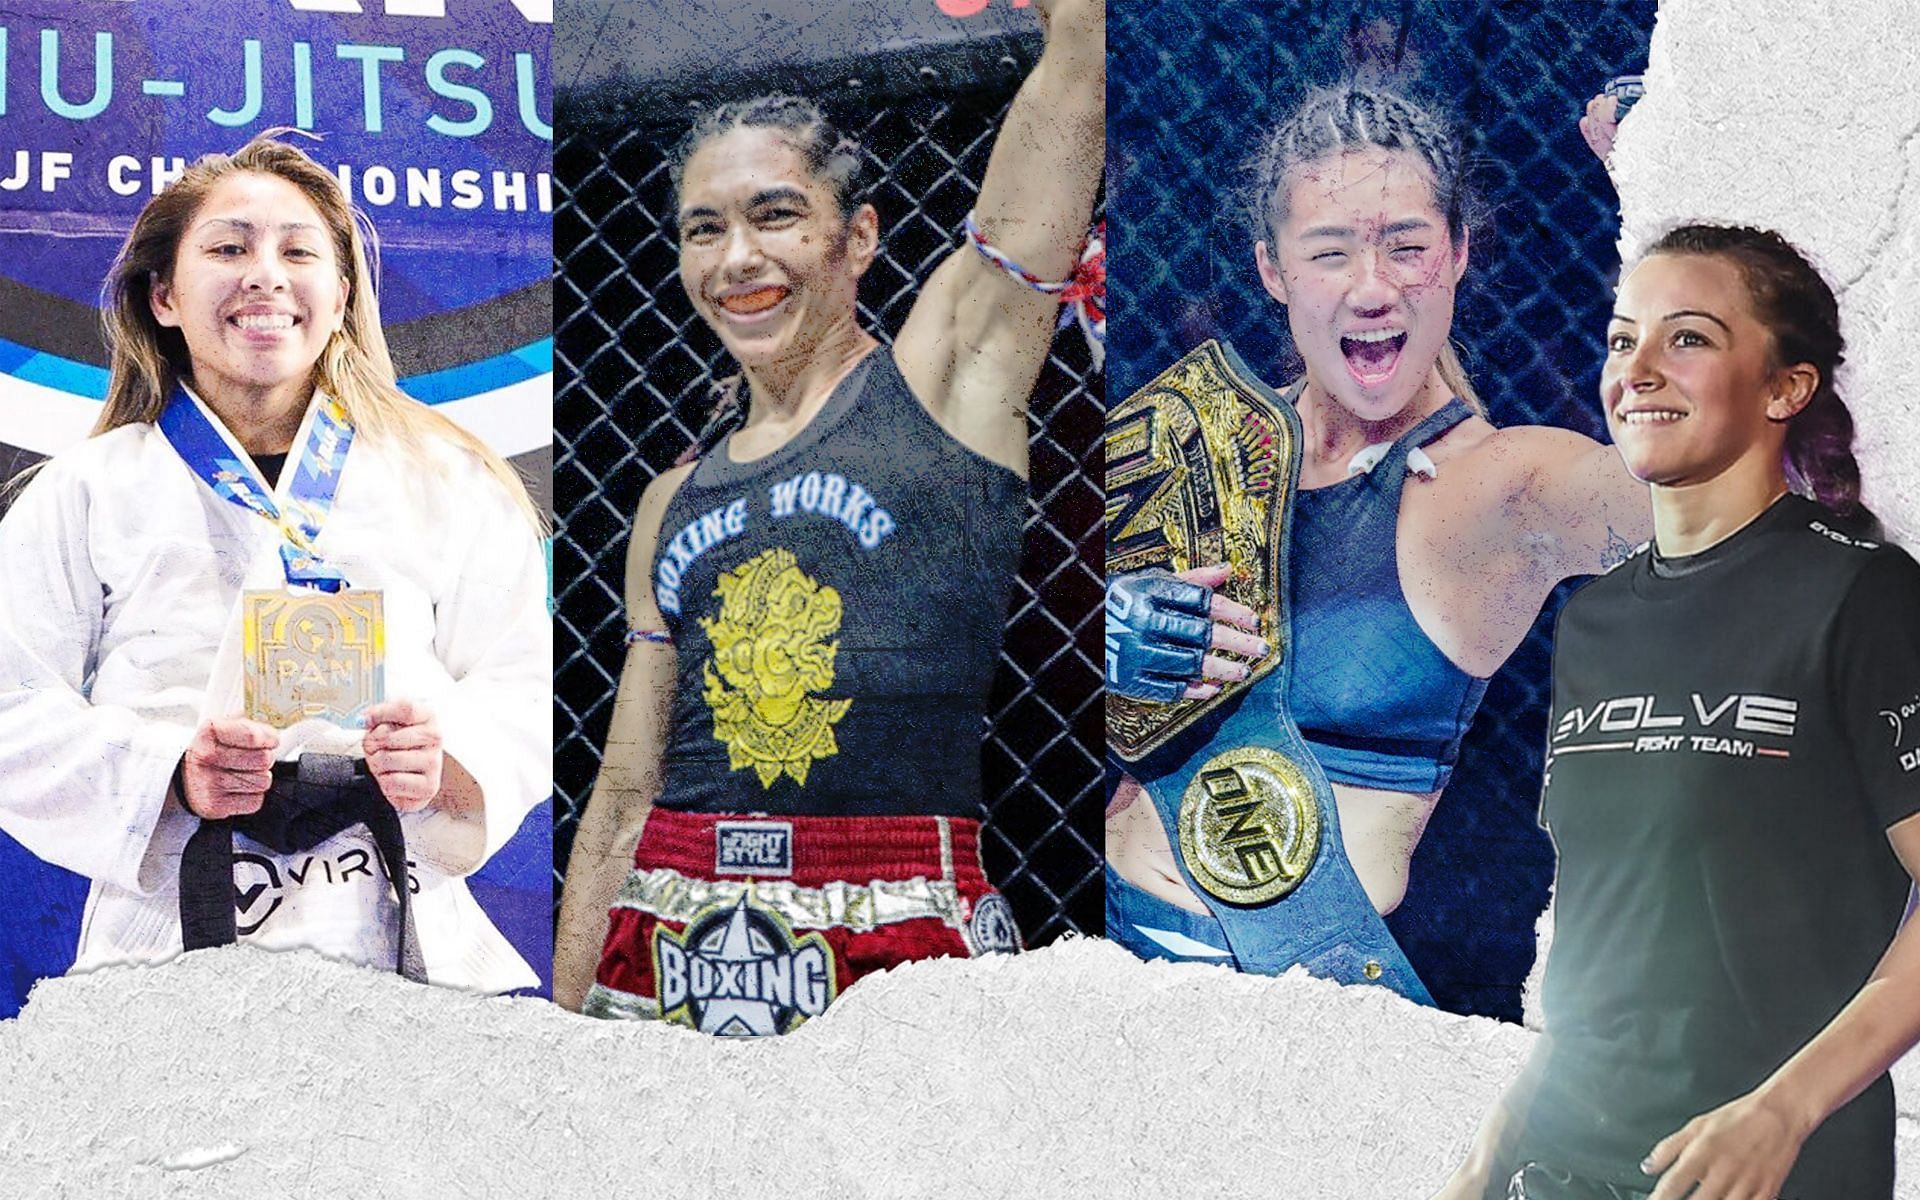 Fans suggested Jessa Khan (L), Janet Todd (2nd from L), and Angela Lee (2nd from R) as potential opponents for Danielle Kelly (R). | [Photos: ONE Championship/@jessakhan on Instagram]